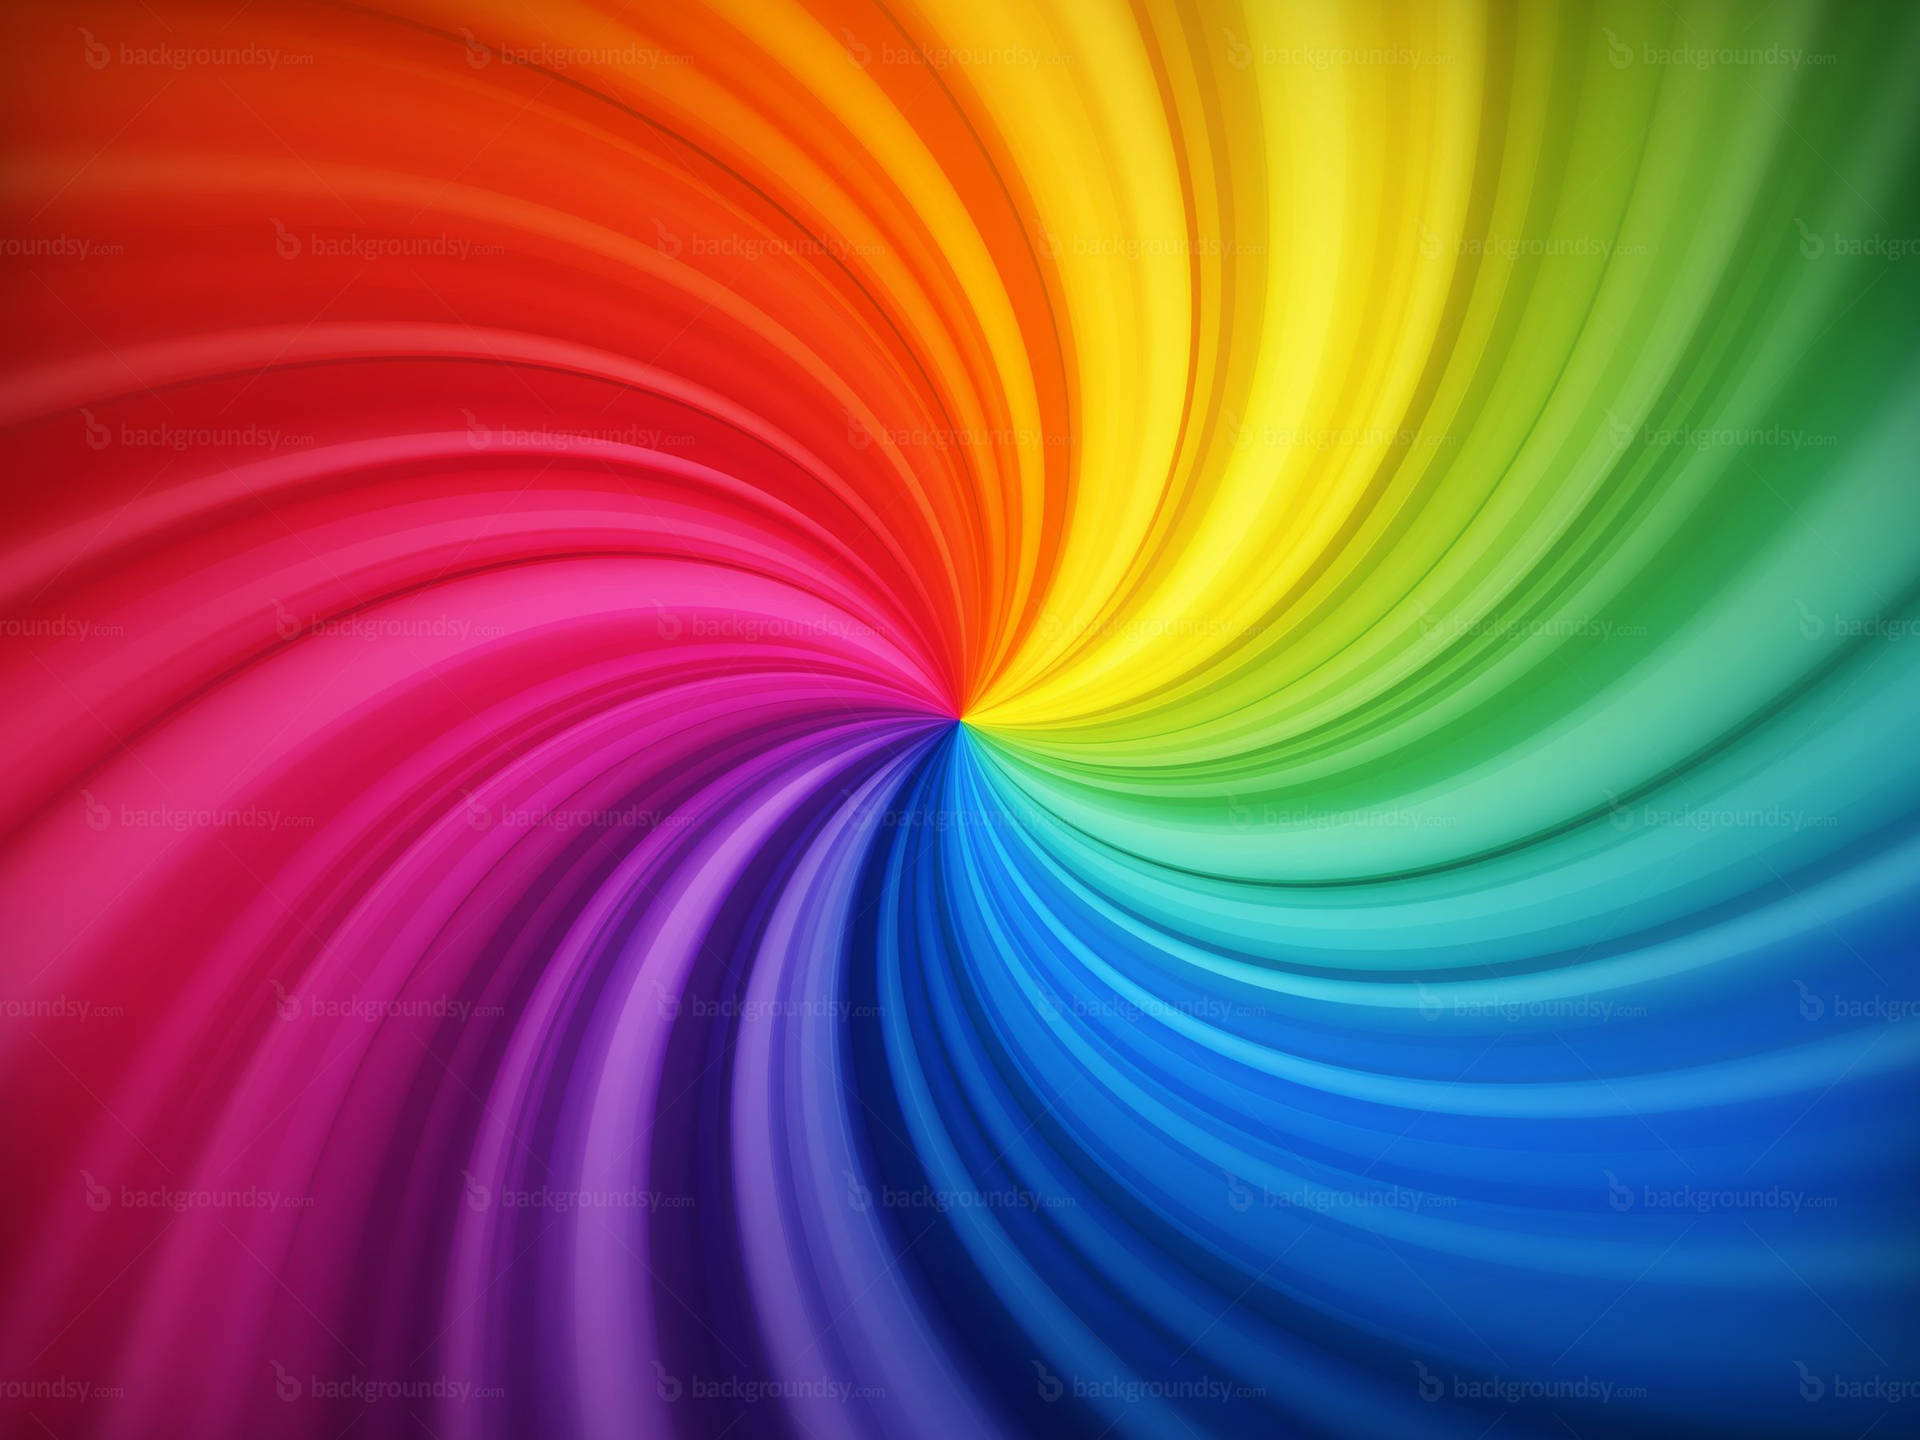 All The Colors Of The Rainbow Wallpaper